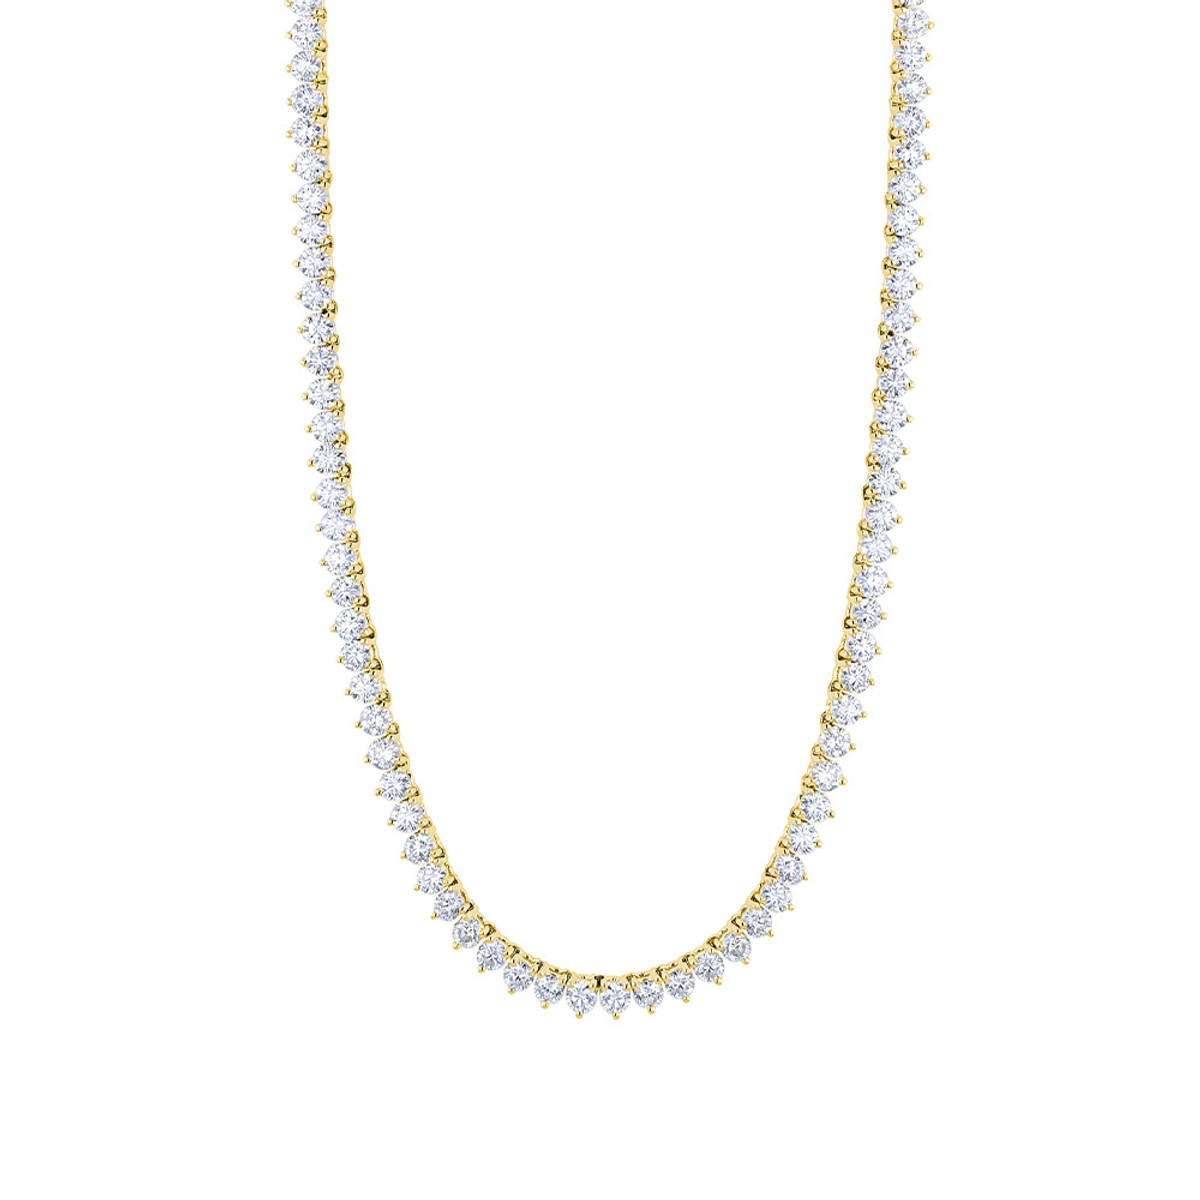 Hyde Park Collection 18K Yellow Gold Diamond Line Necklace-59715 Product Image